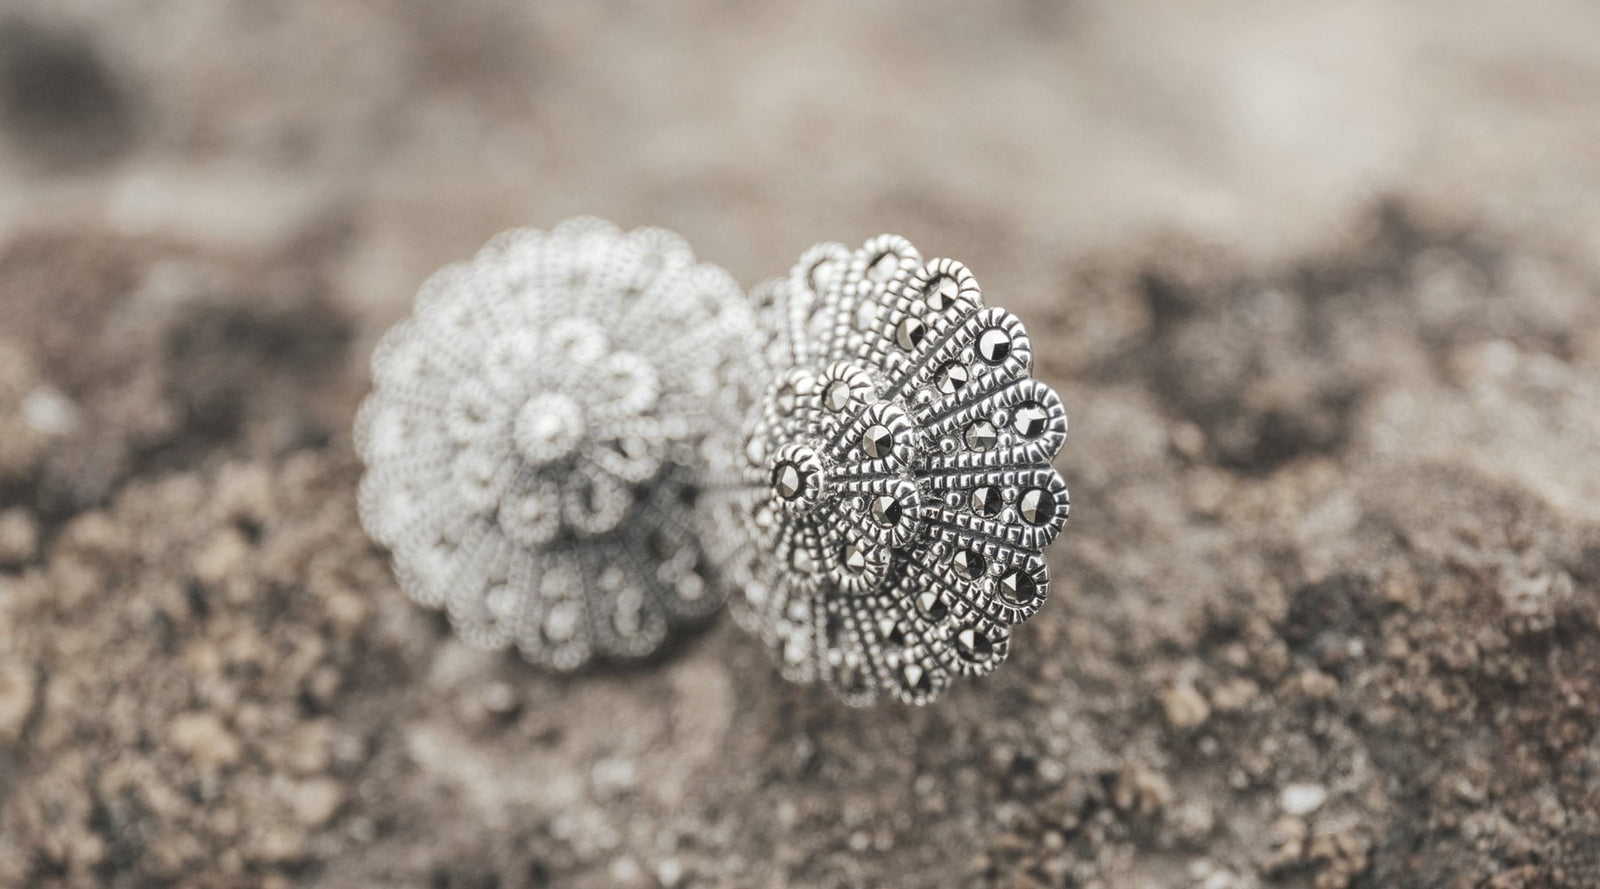 Vintage Marcasite Jewelry: Marcasite Throughout the Ages